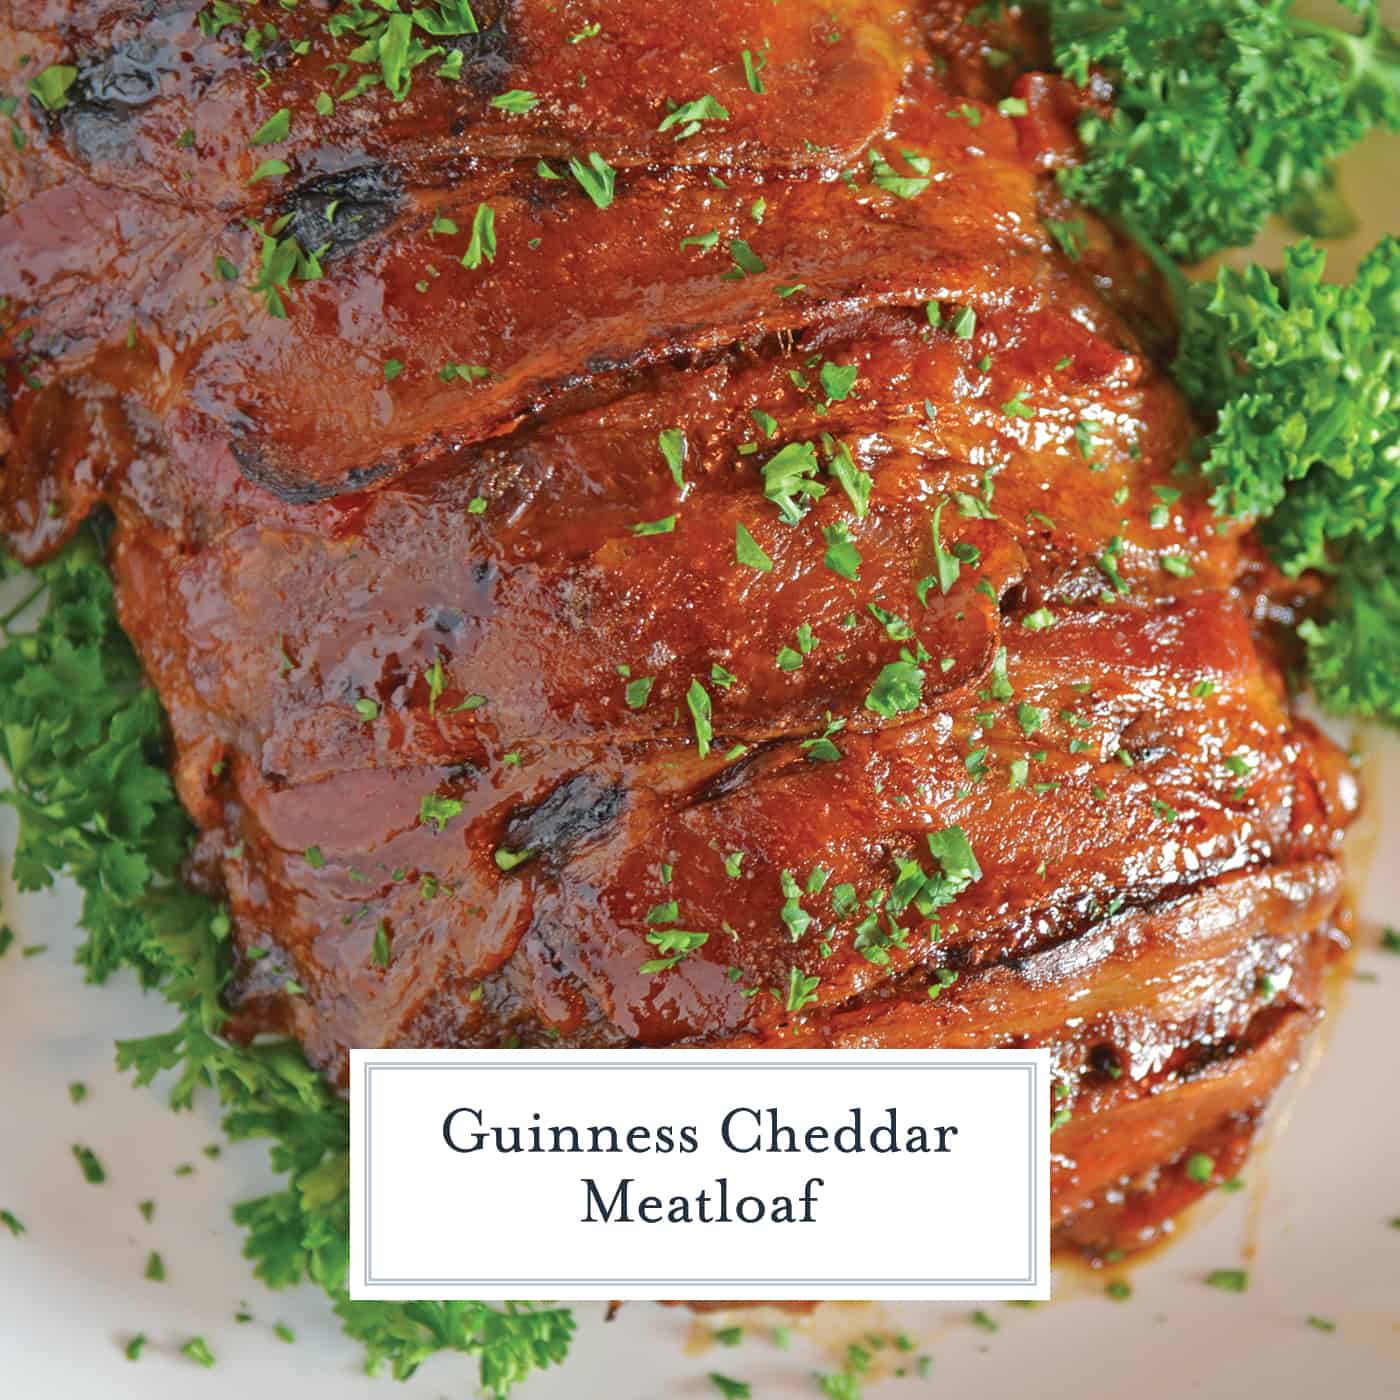 Guinness and Cheddar Meatloaf is packed with vegetables simmered in stout beer and fresh sage topped with crispy bacon and a sweet molasses glaze. #baconwrappedmeatloaf #easymeatloafrecipes www.savoryexperiments.com 